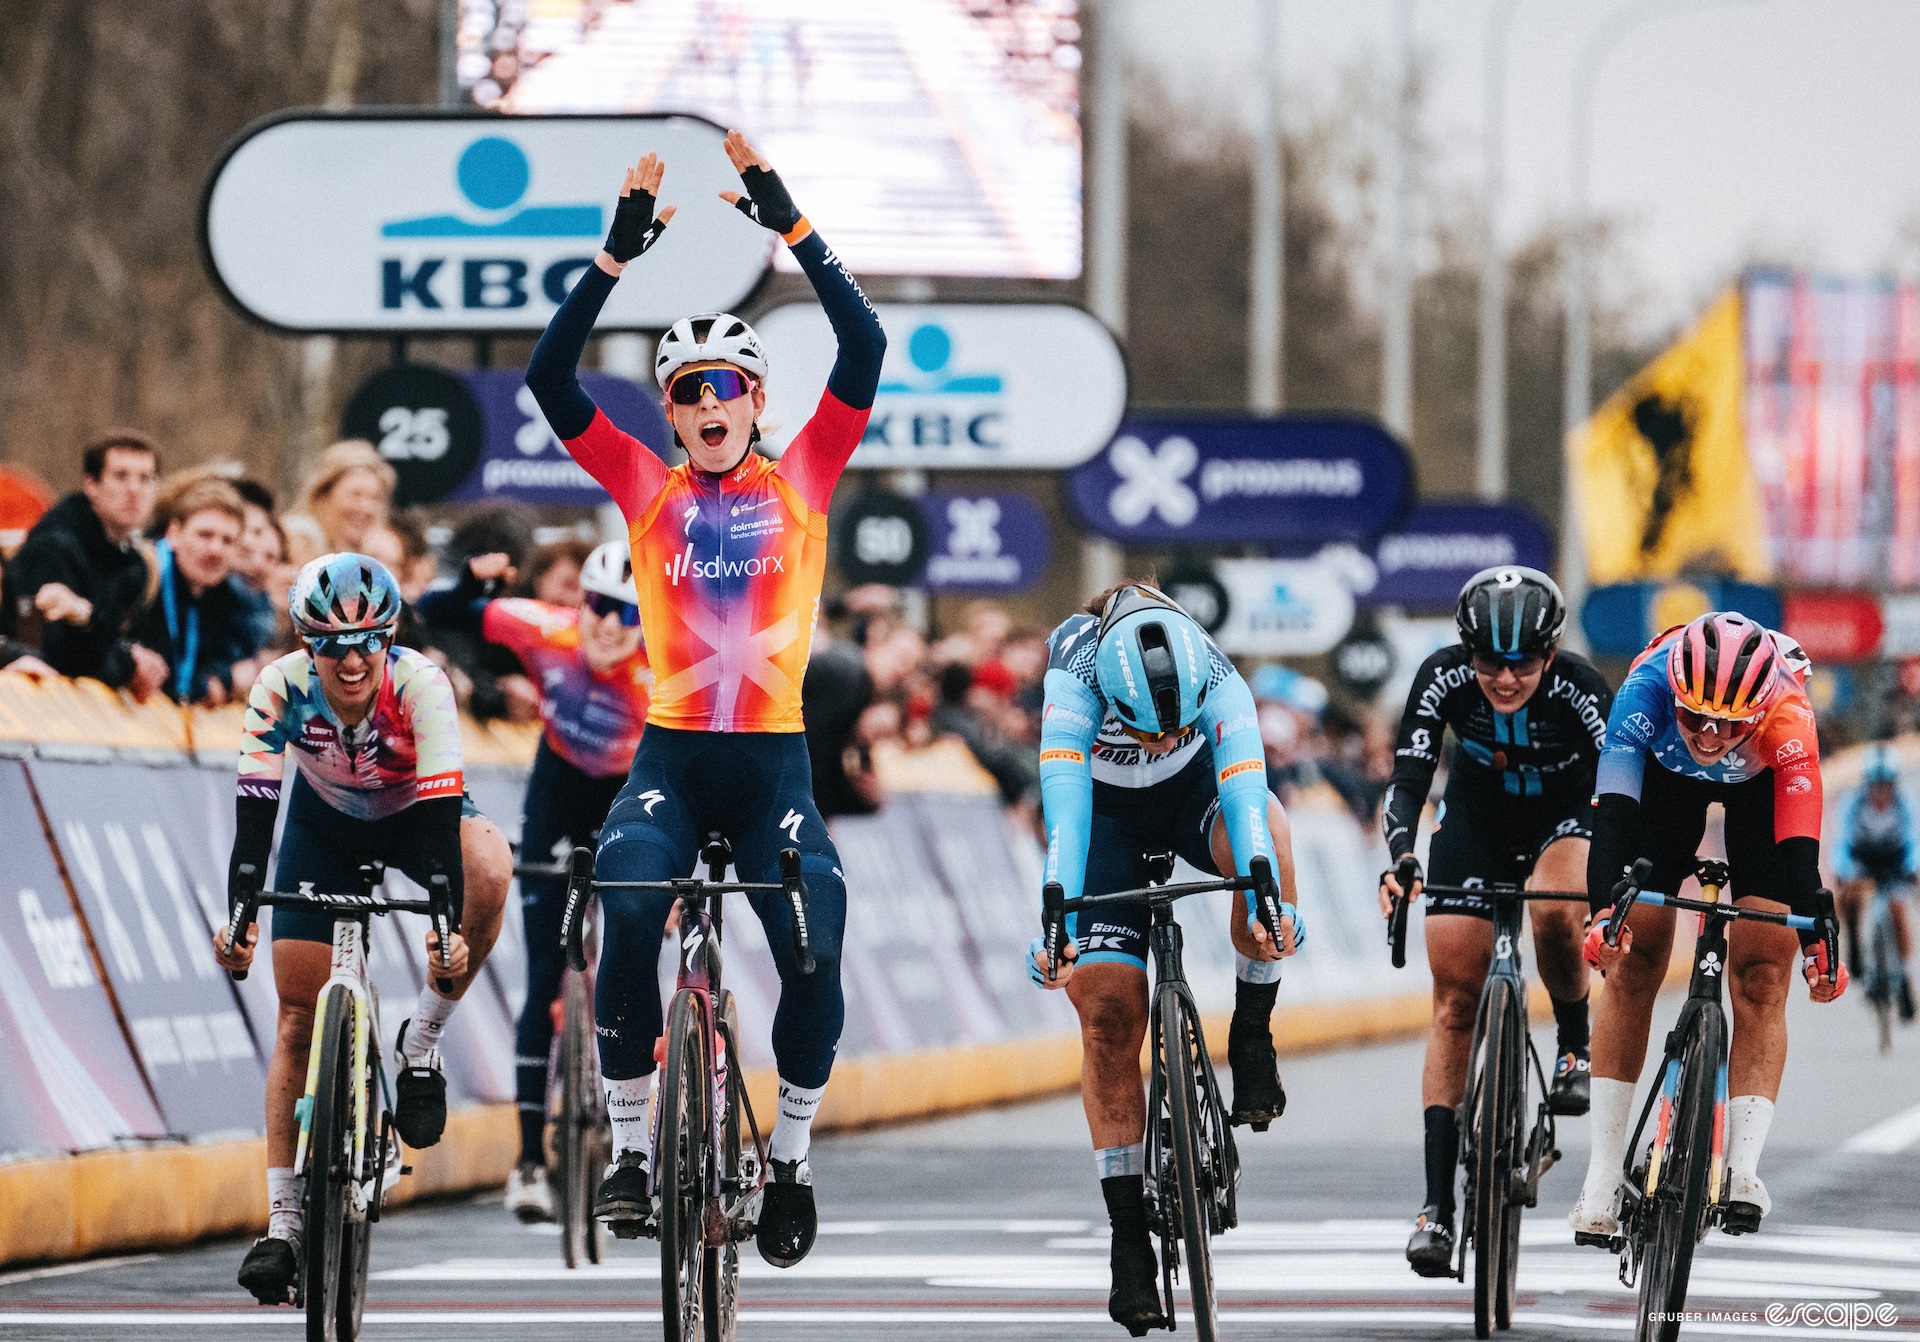 A cyclist raises their arms in the air at the finish like of a race. She is surrounded by other riders who look like they are in pain. 